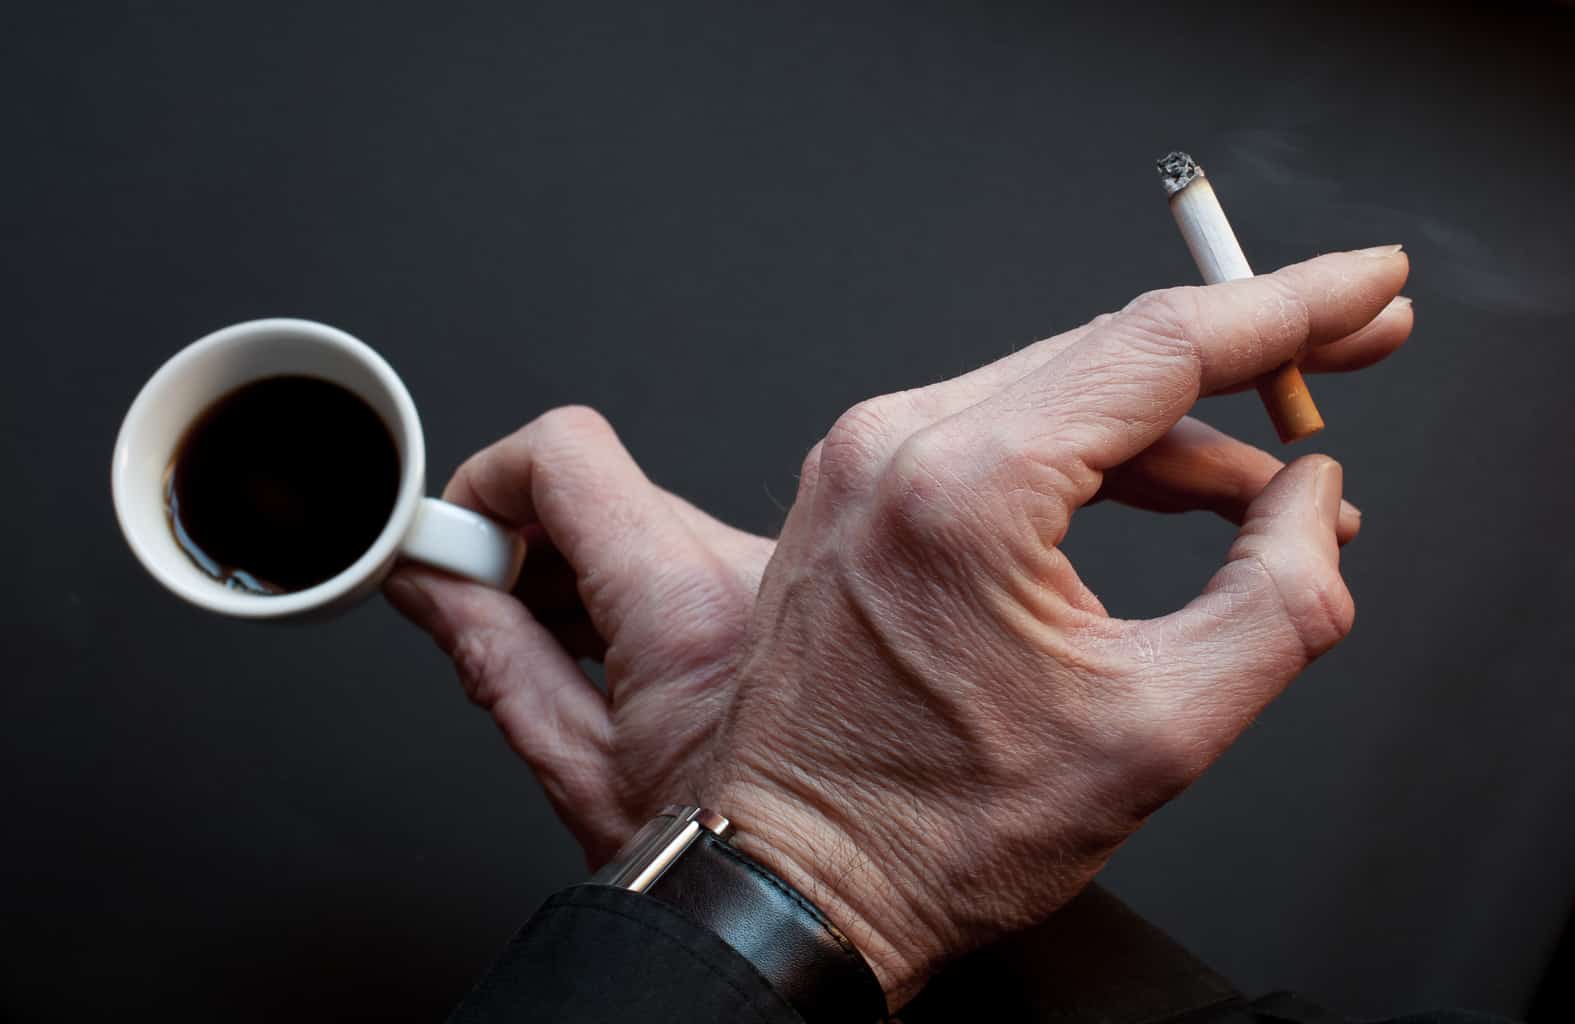 Truth and lies: benefits from smoking and coffee? Huh?